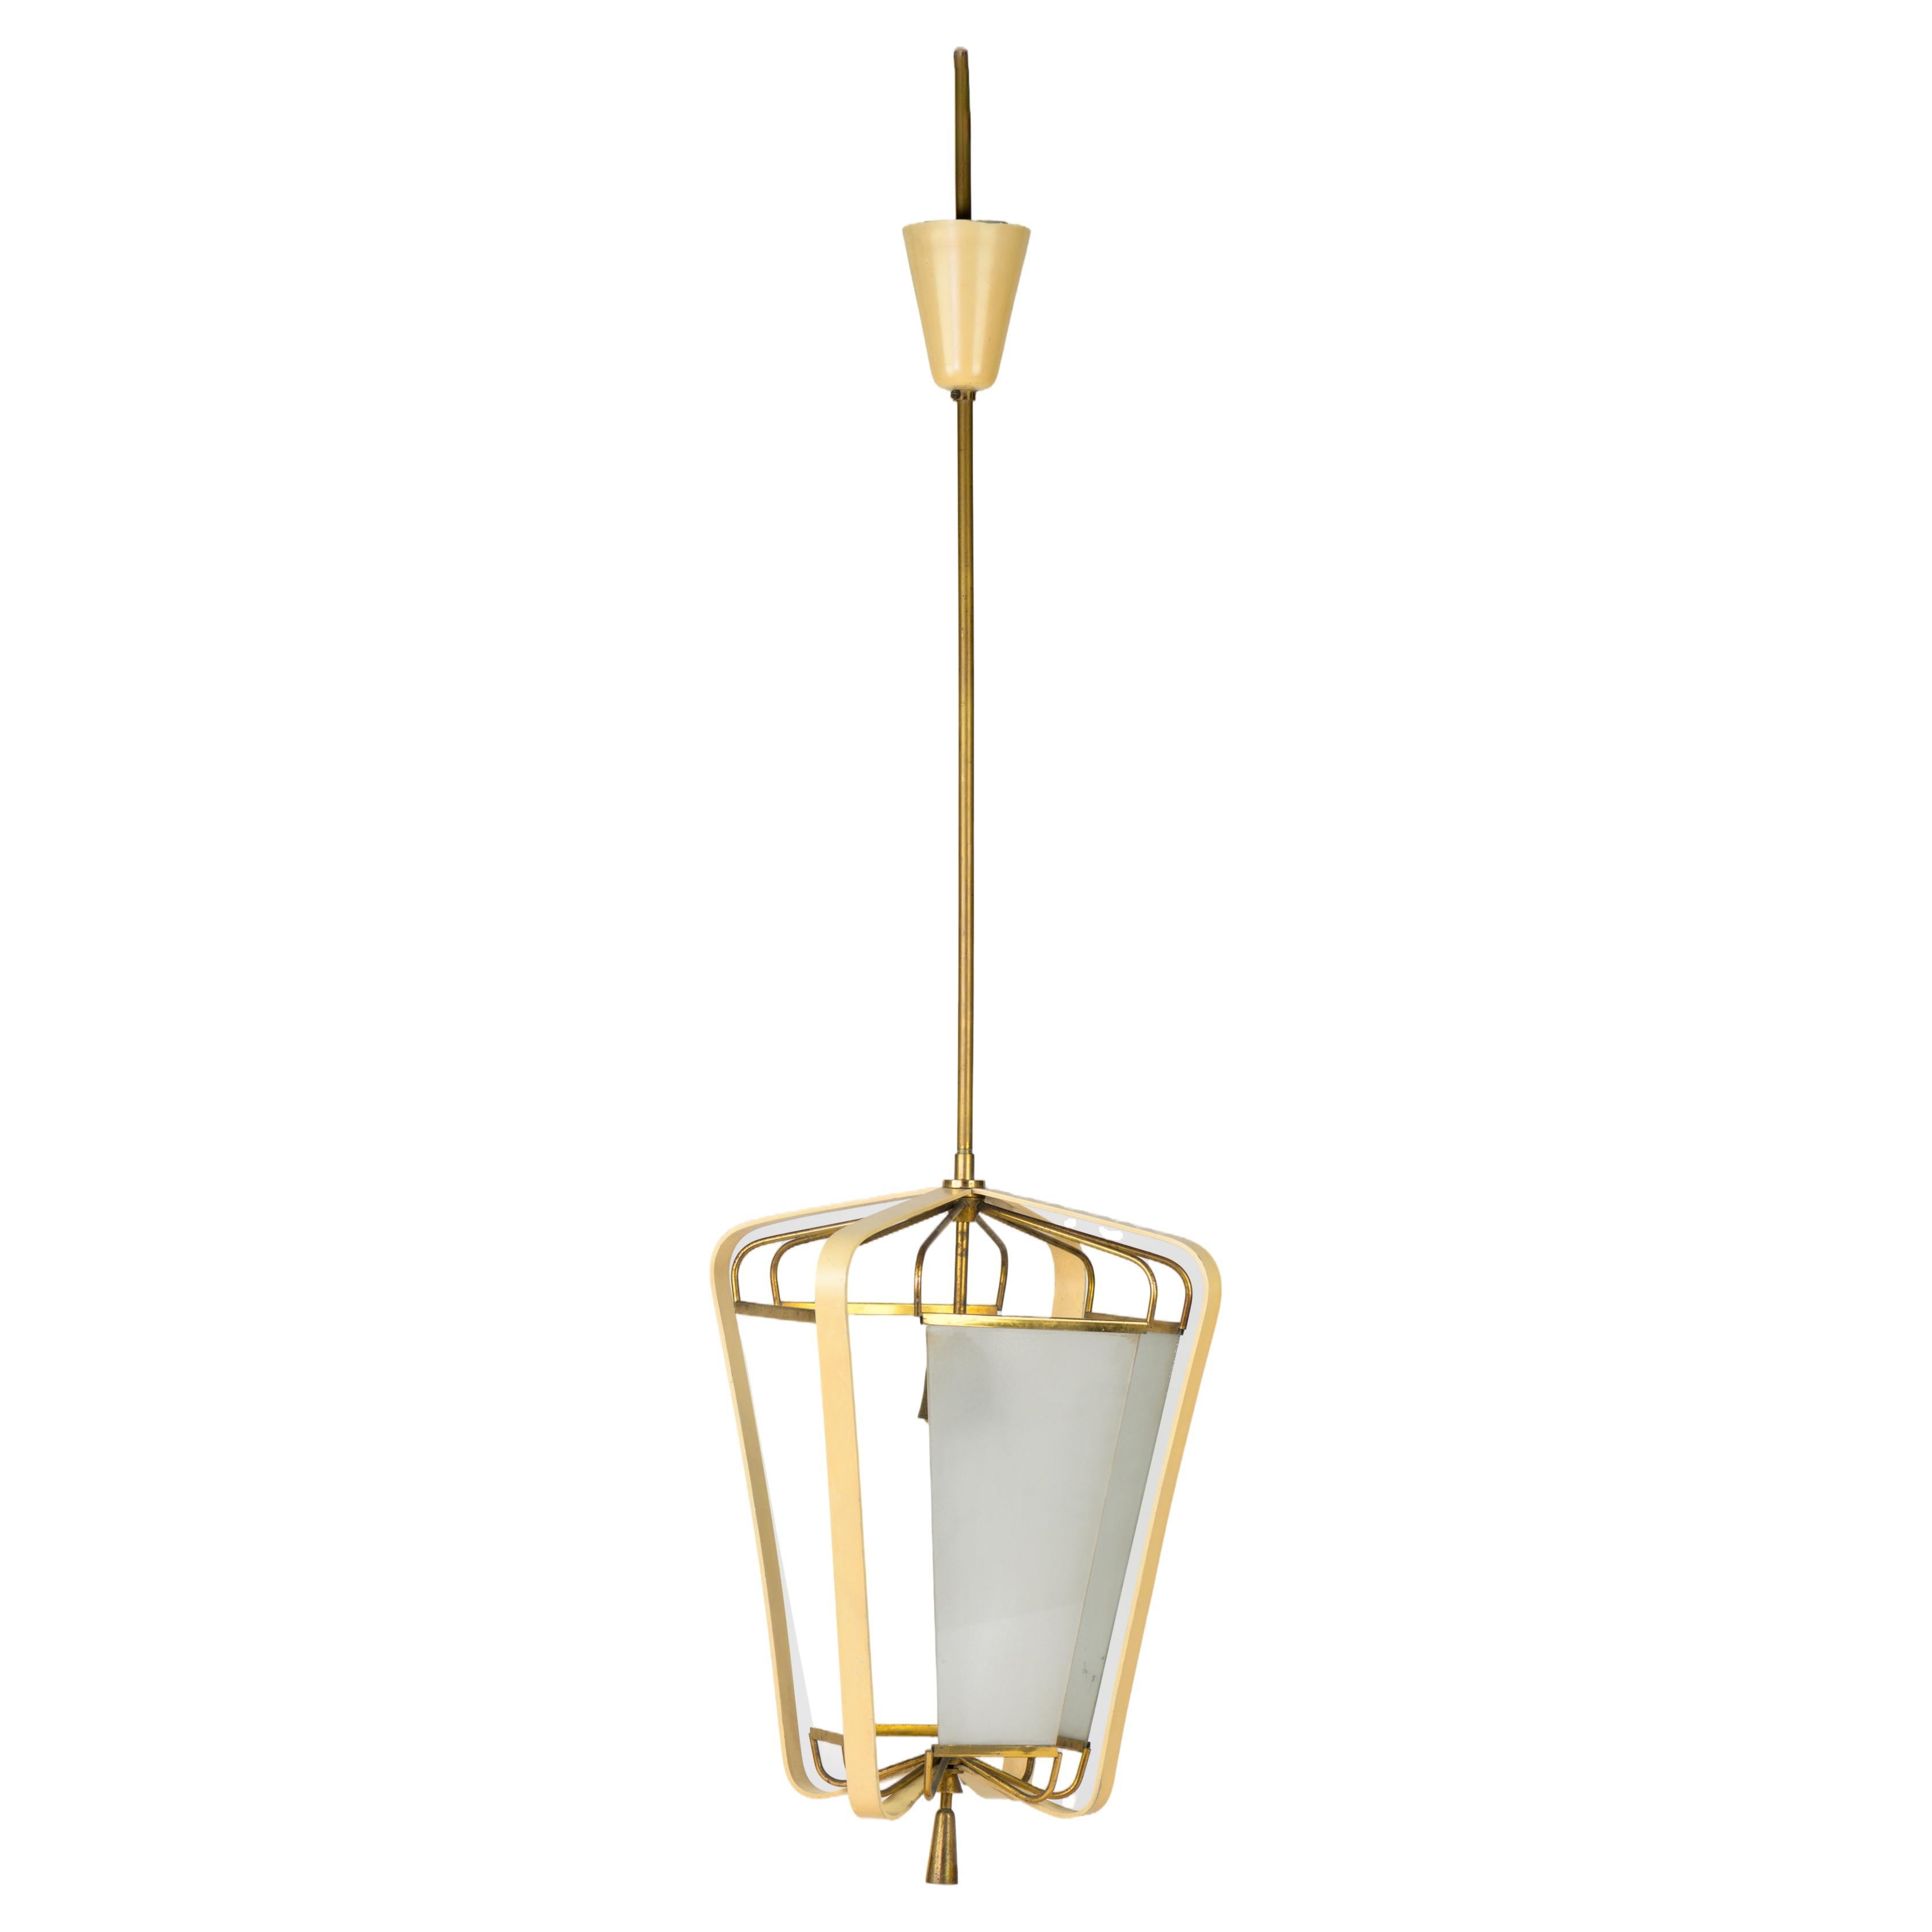 Pendant light in brass, glass and laquered metal design by Angelo Lelli circa 50